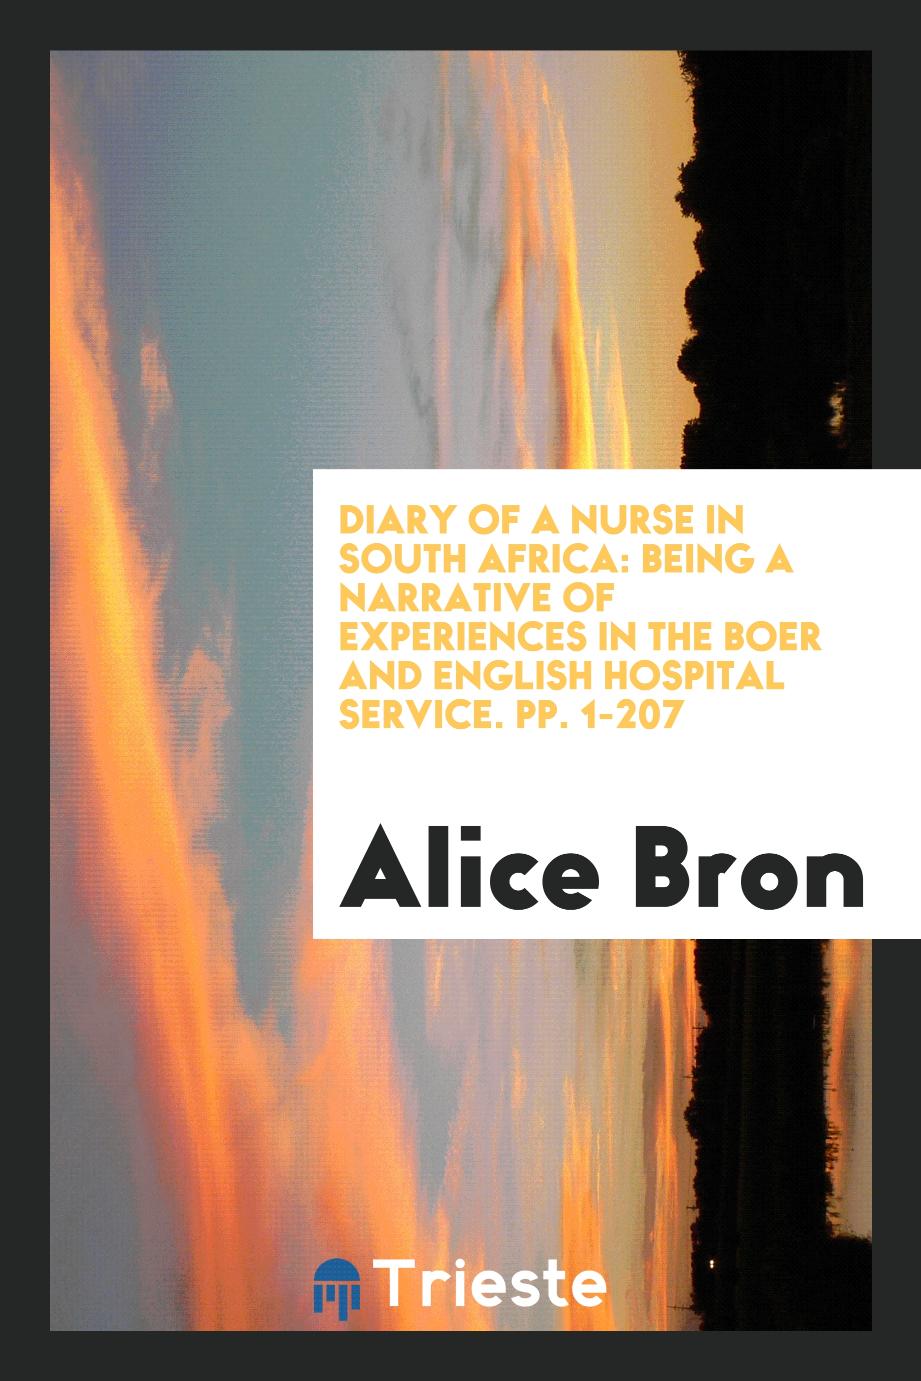 Diary of a Nurse in South Africa: Being a Narrative of Experiences in the Boer and English Hospital Service. pp. 1-207